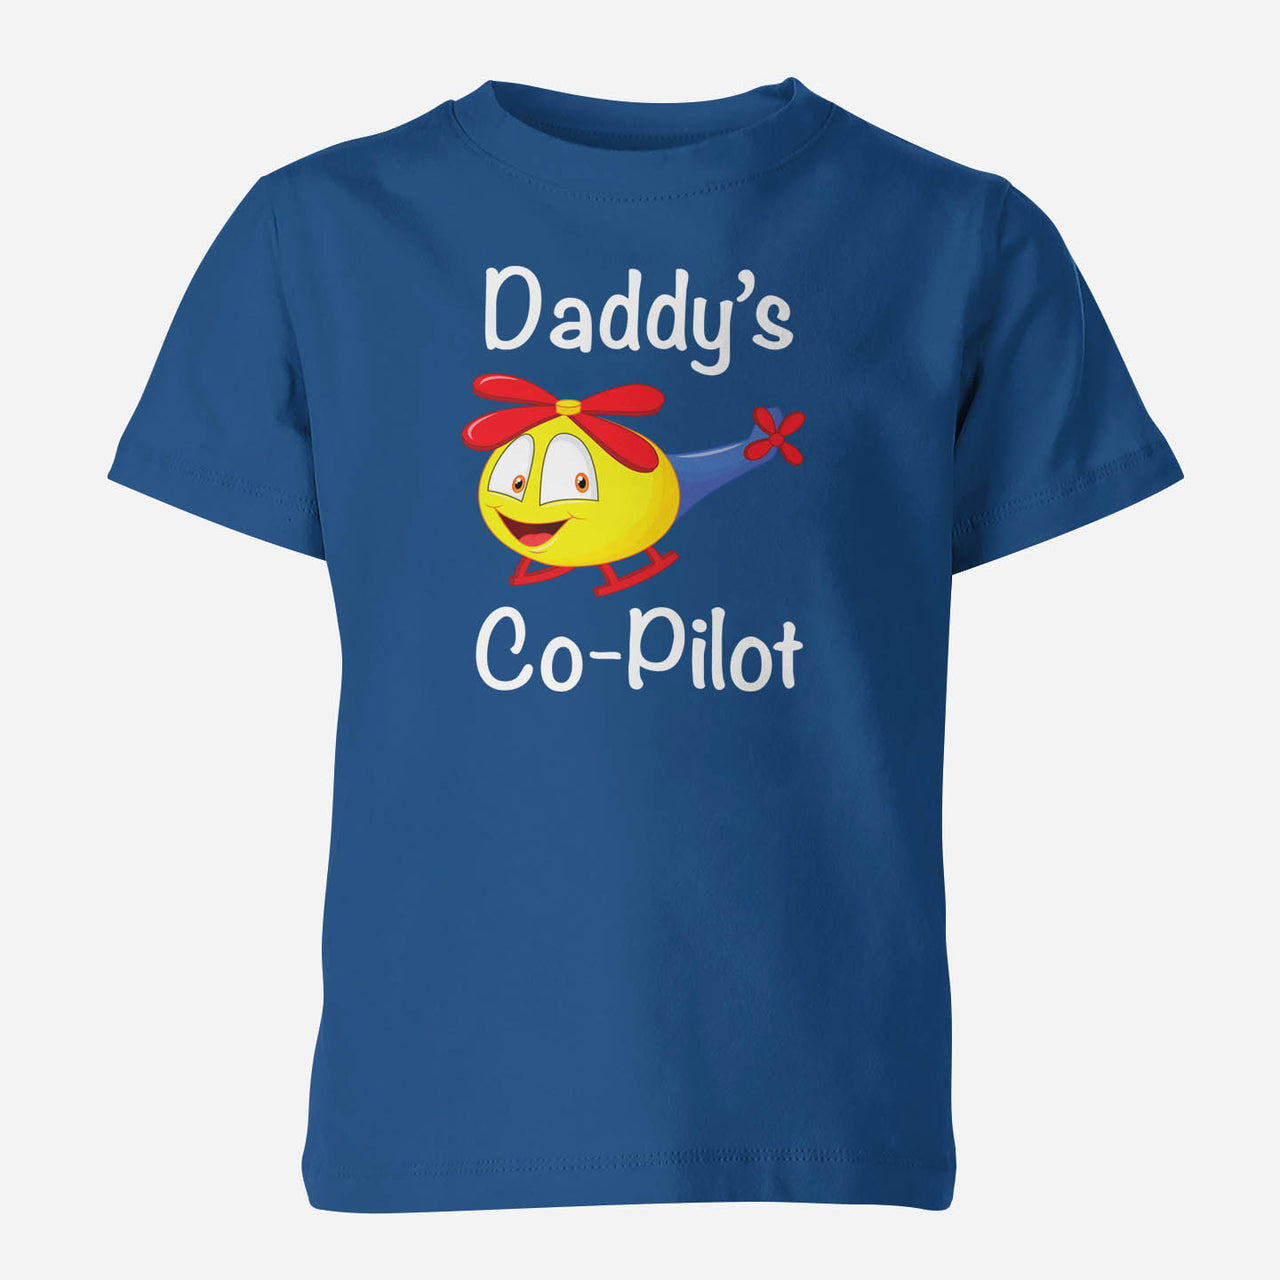 Daddy's Co-Pilot (Helicopter) Designed Children T-Shirts